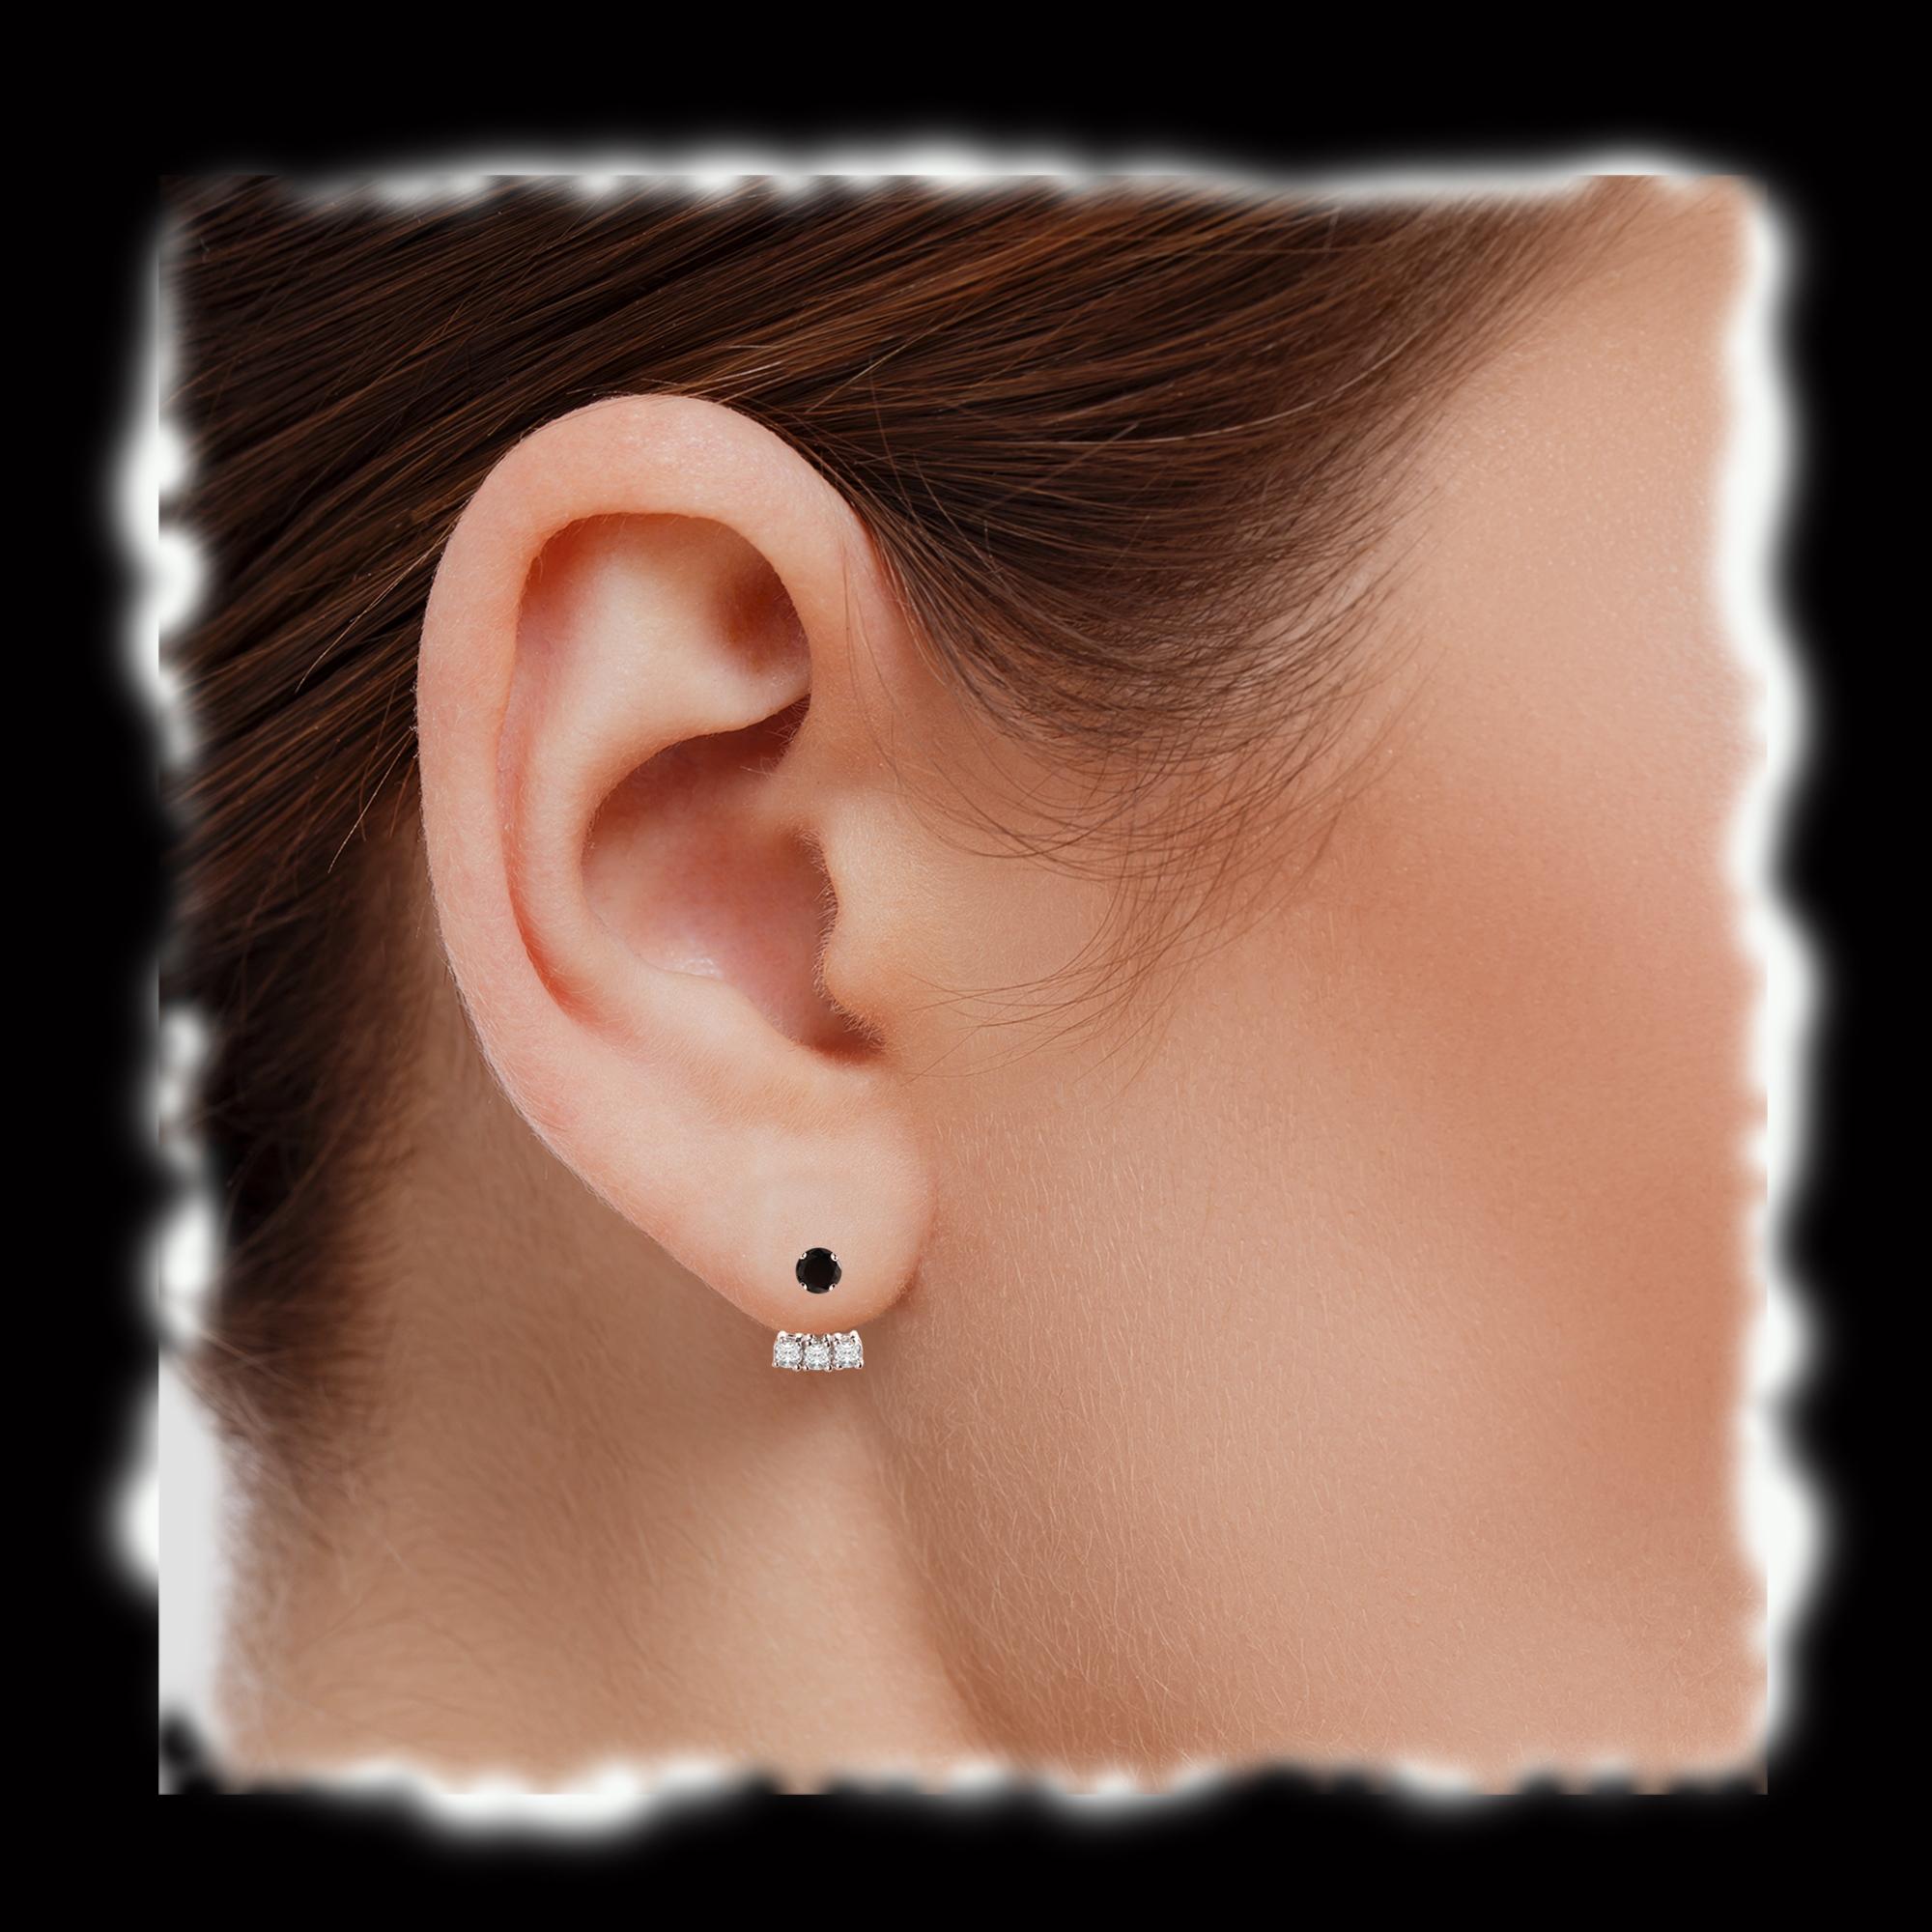 Unique trendy jacket earring
white and  black diamonds total all 0.46 carat G-SI
white diamond size are 2.0 mm each
black diamonds size are 3.2 mm each
all natural diamonds !
14K White Gold 3.20 grams
(approx distance from the black to white is 8.0